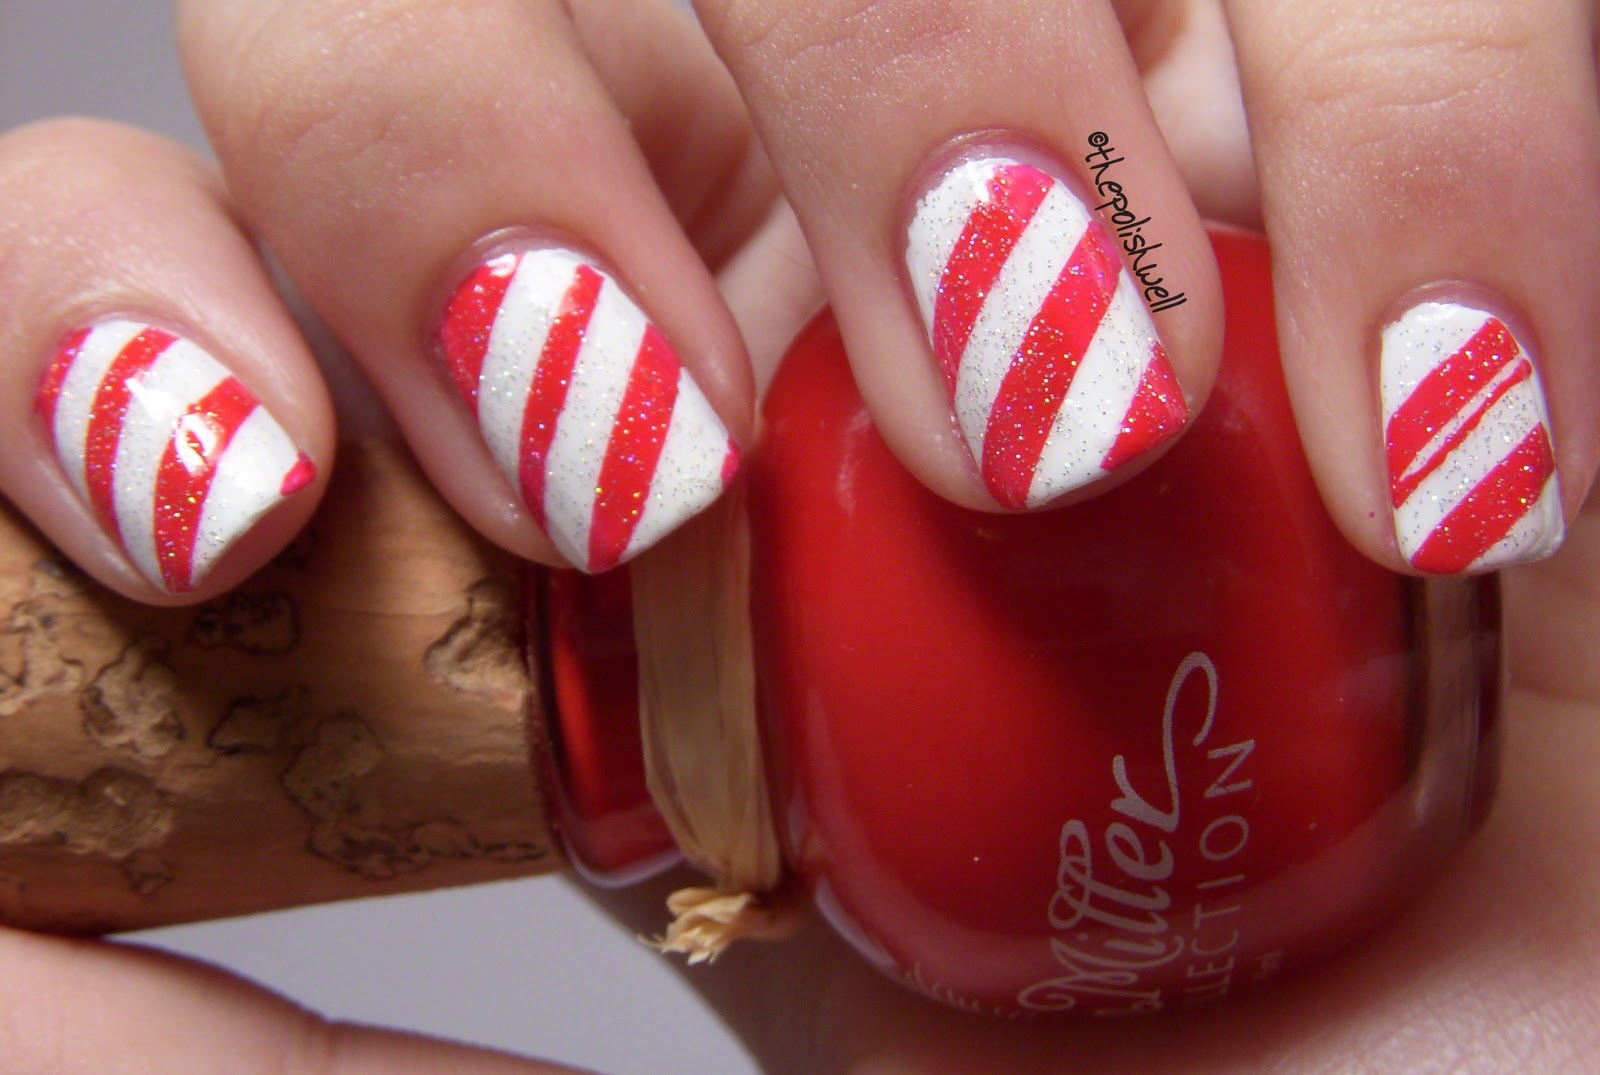 10. "Candy Cane French Manicure for a Sweet Holiday Touch" - wide 4